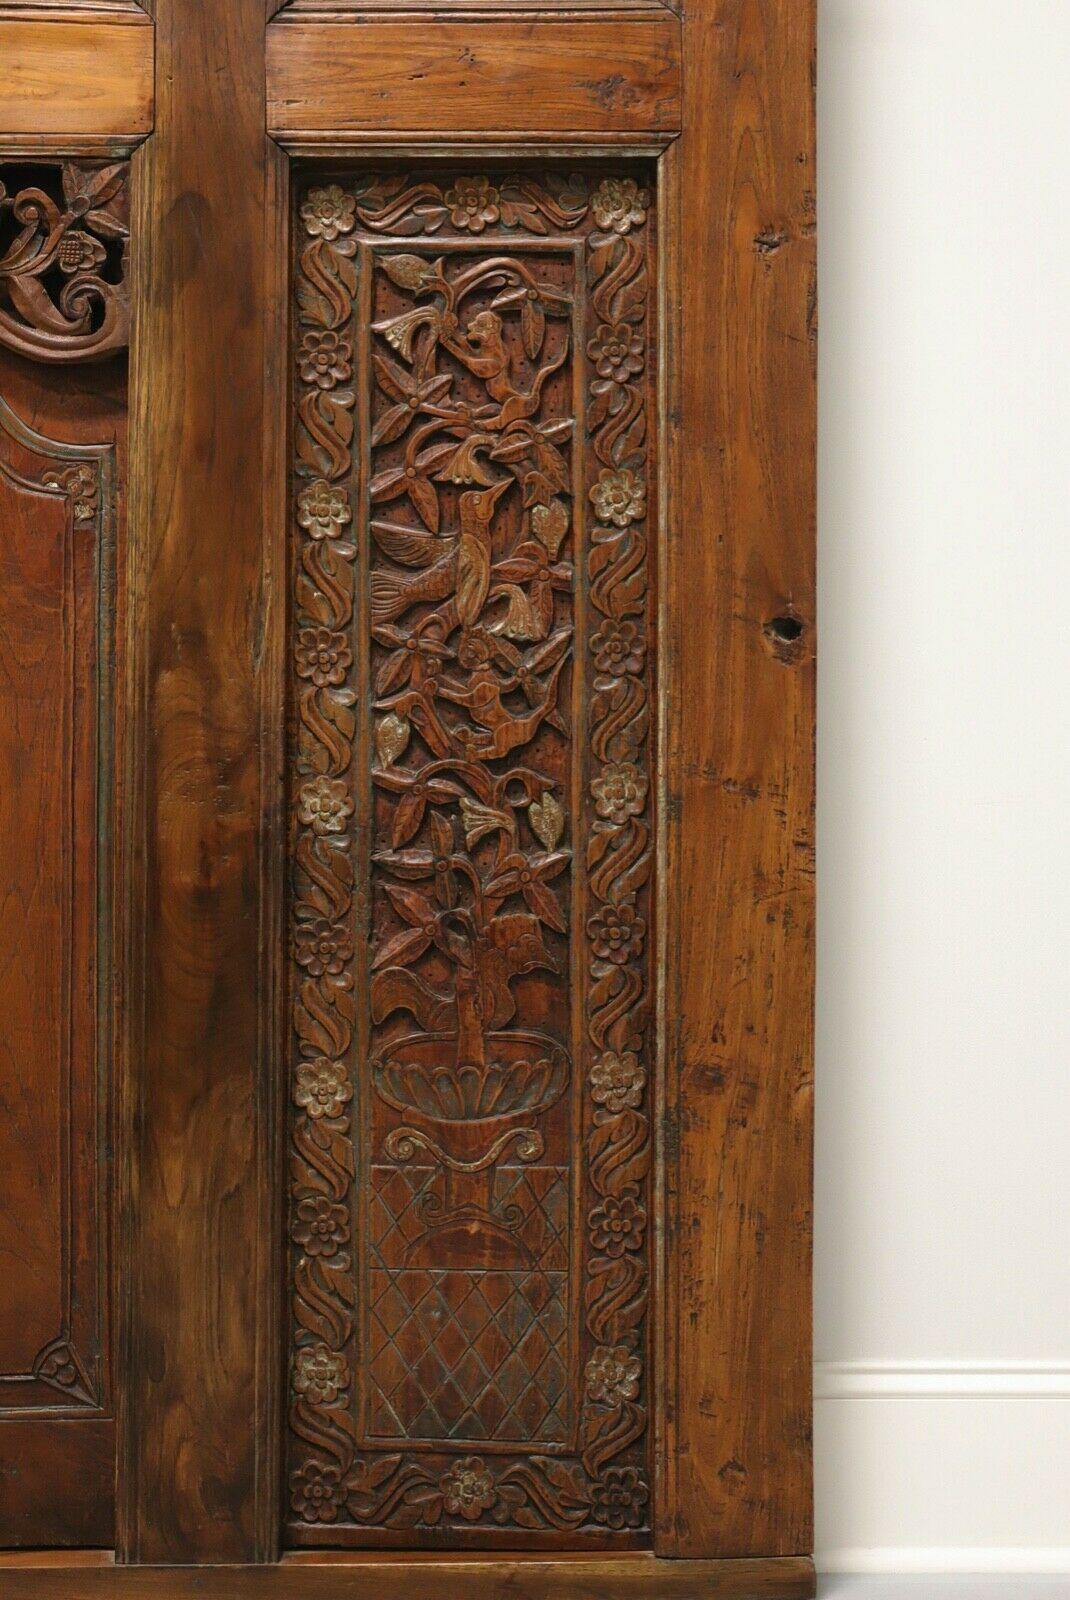 Metal Antique Thai Carved Panel with Doors - Use as Headboard, Room Divider, Wall Art